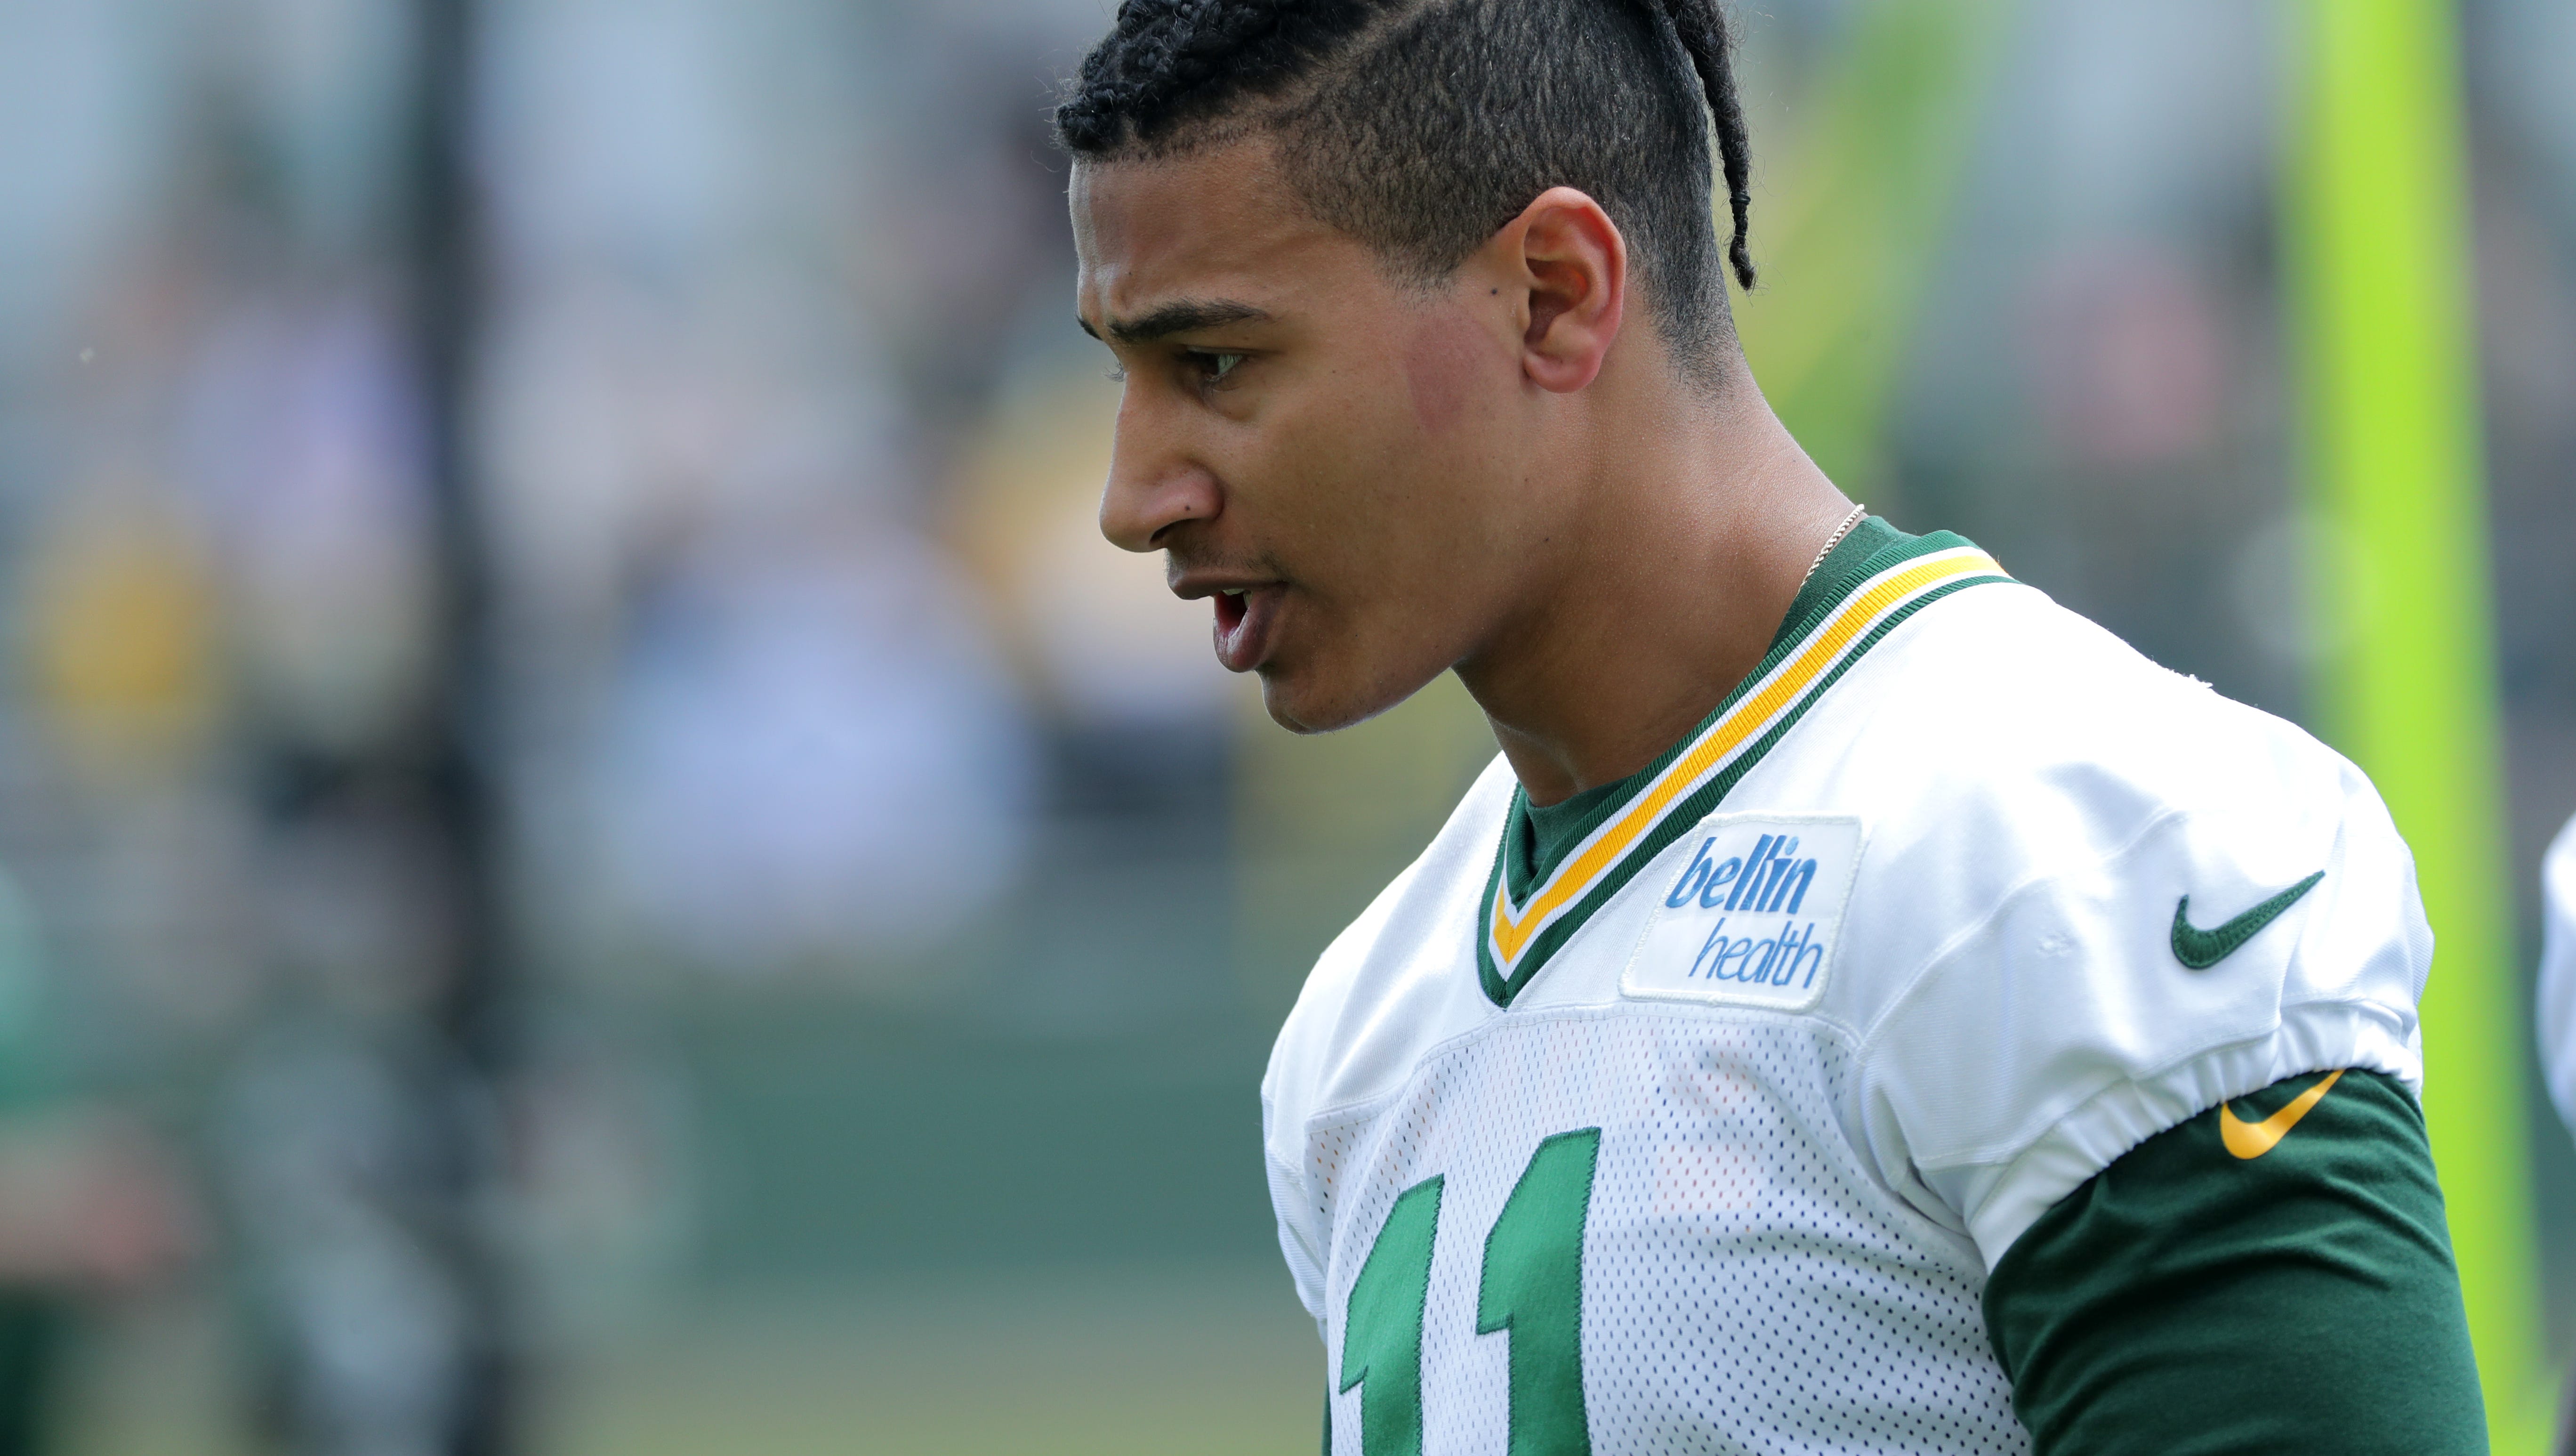 Green Bay Packers wide receiver Trevor Davis (11) is shown during organized team activities Monday, June 4, 2018 in Green Bay, Wis.